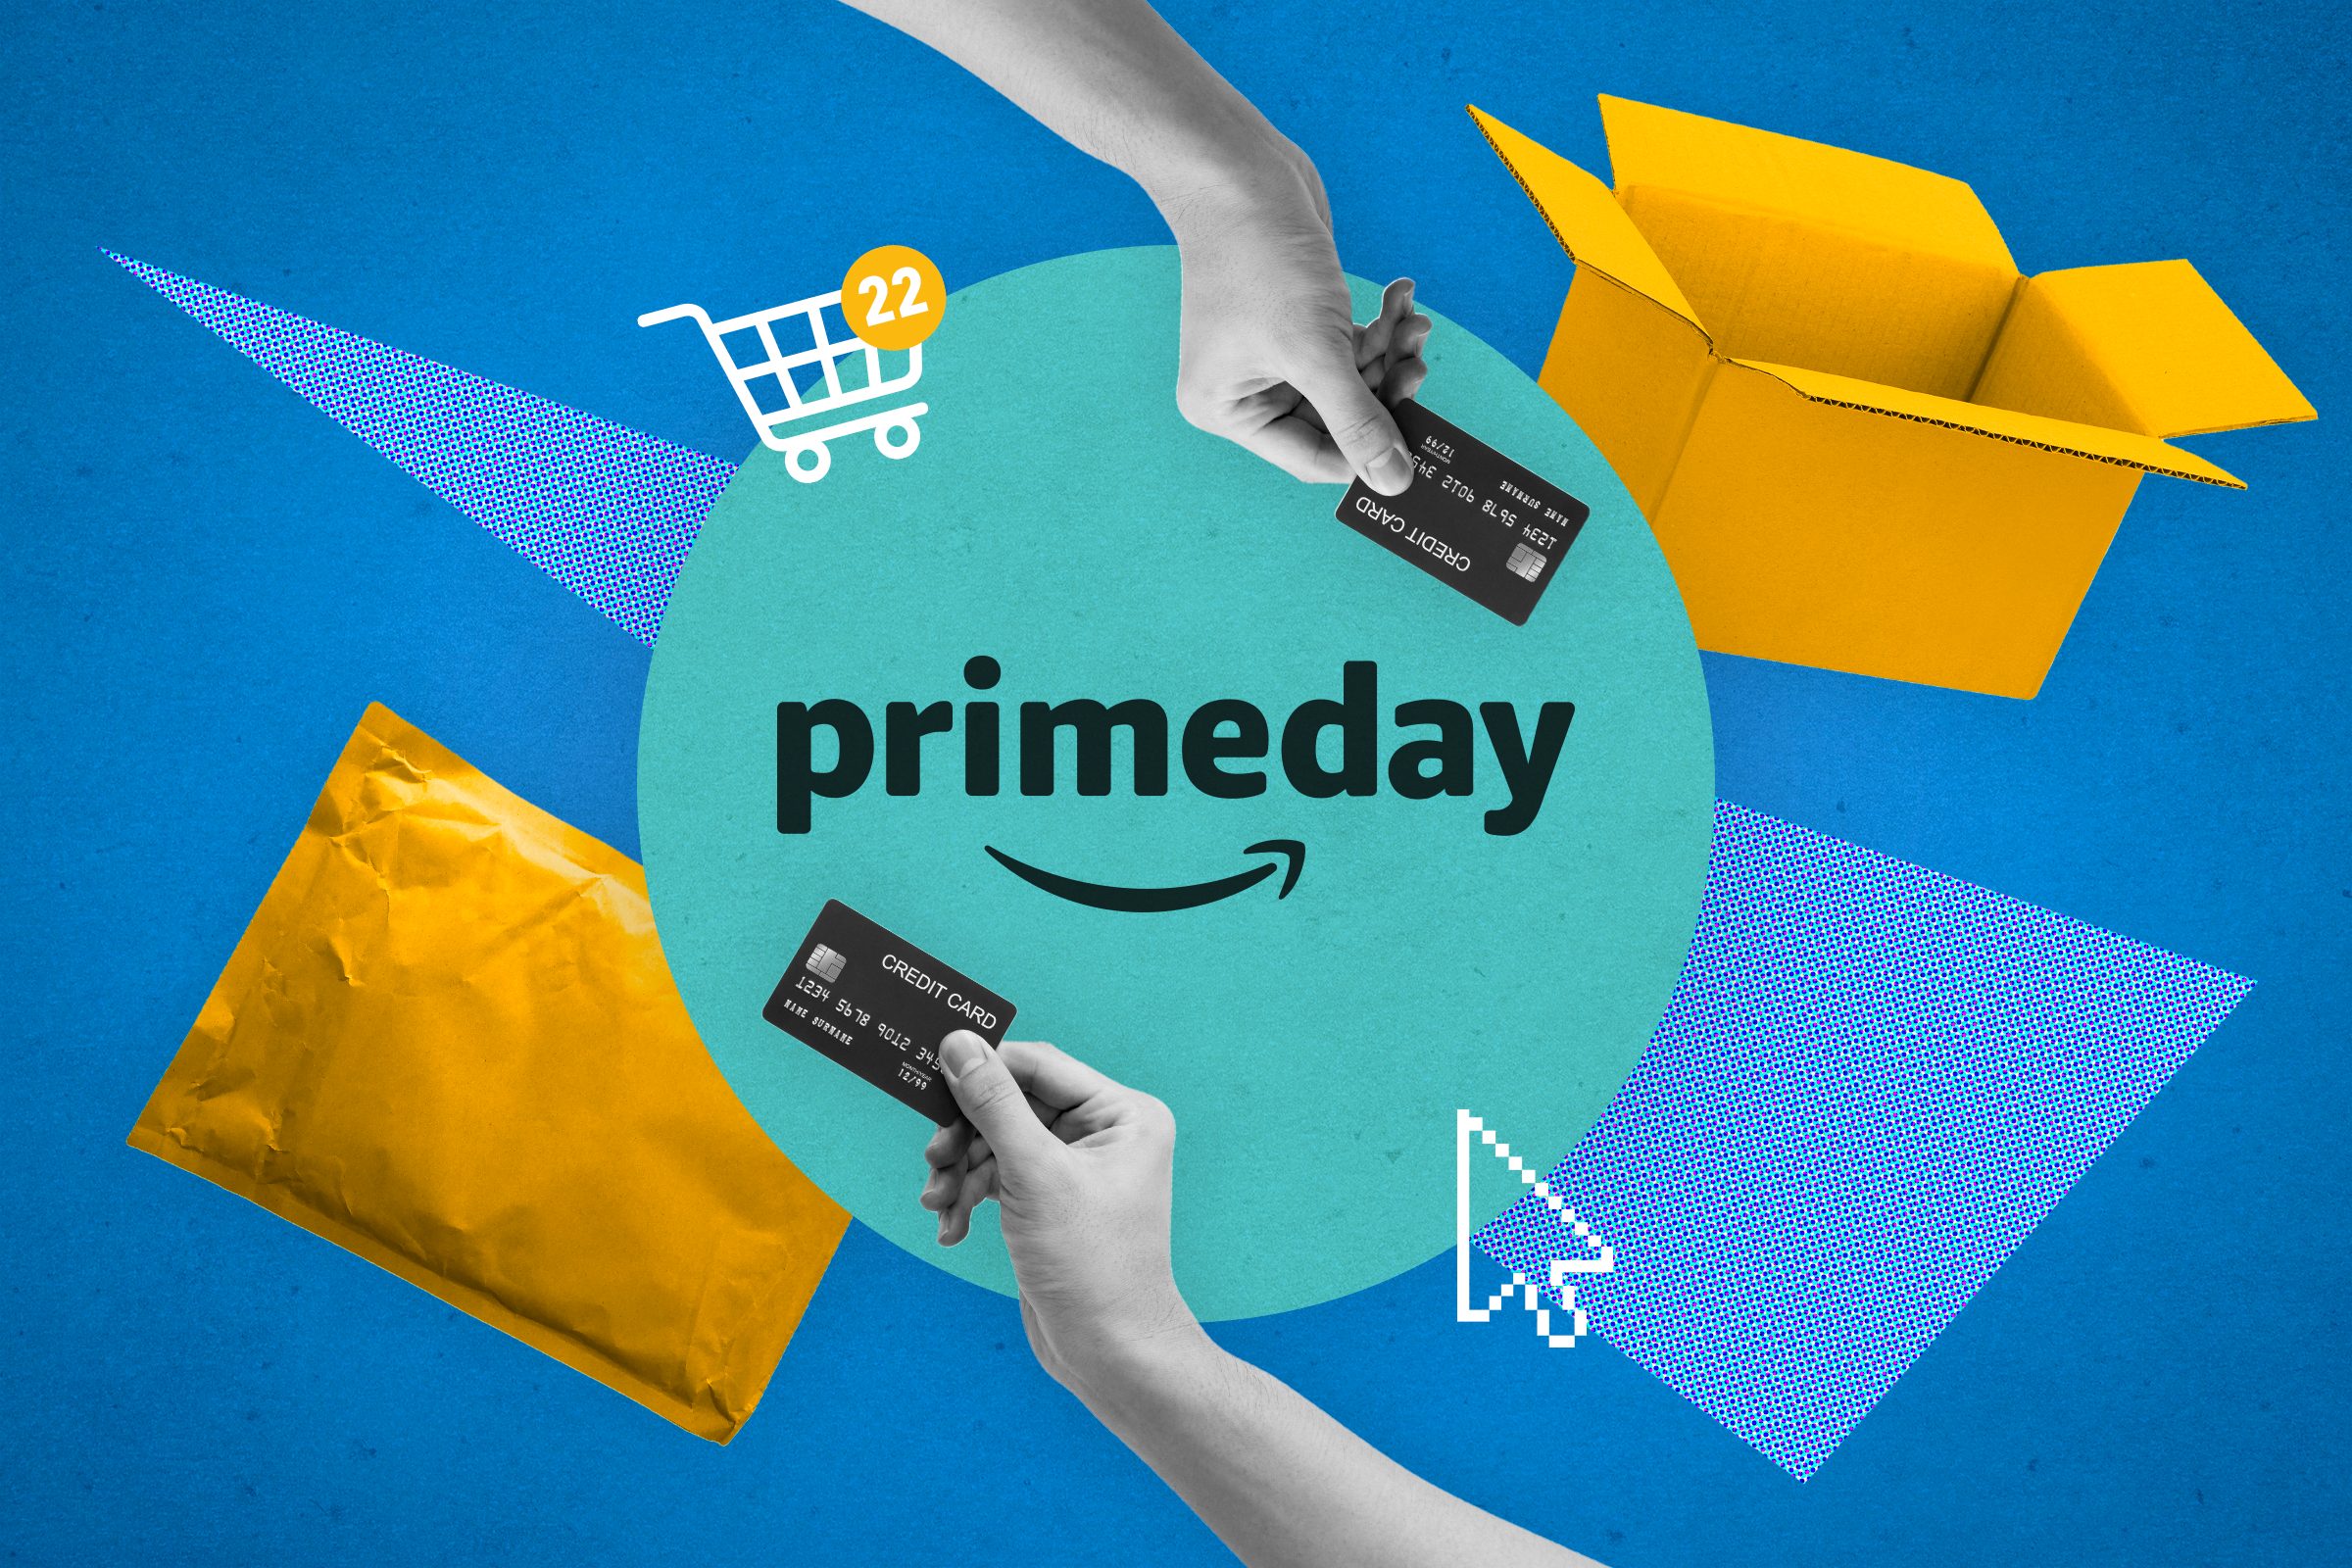 https://www.rd.com/wp-content/uploads/2022/06/Pre-Prime-Day-Deals-and-Promos-FT-GettyImages-6.jpg